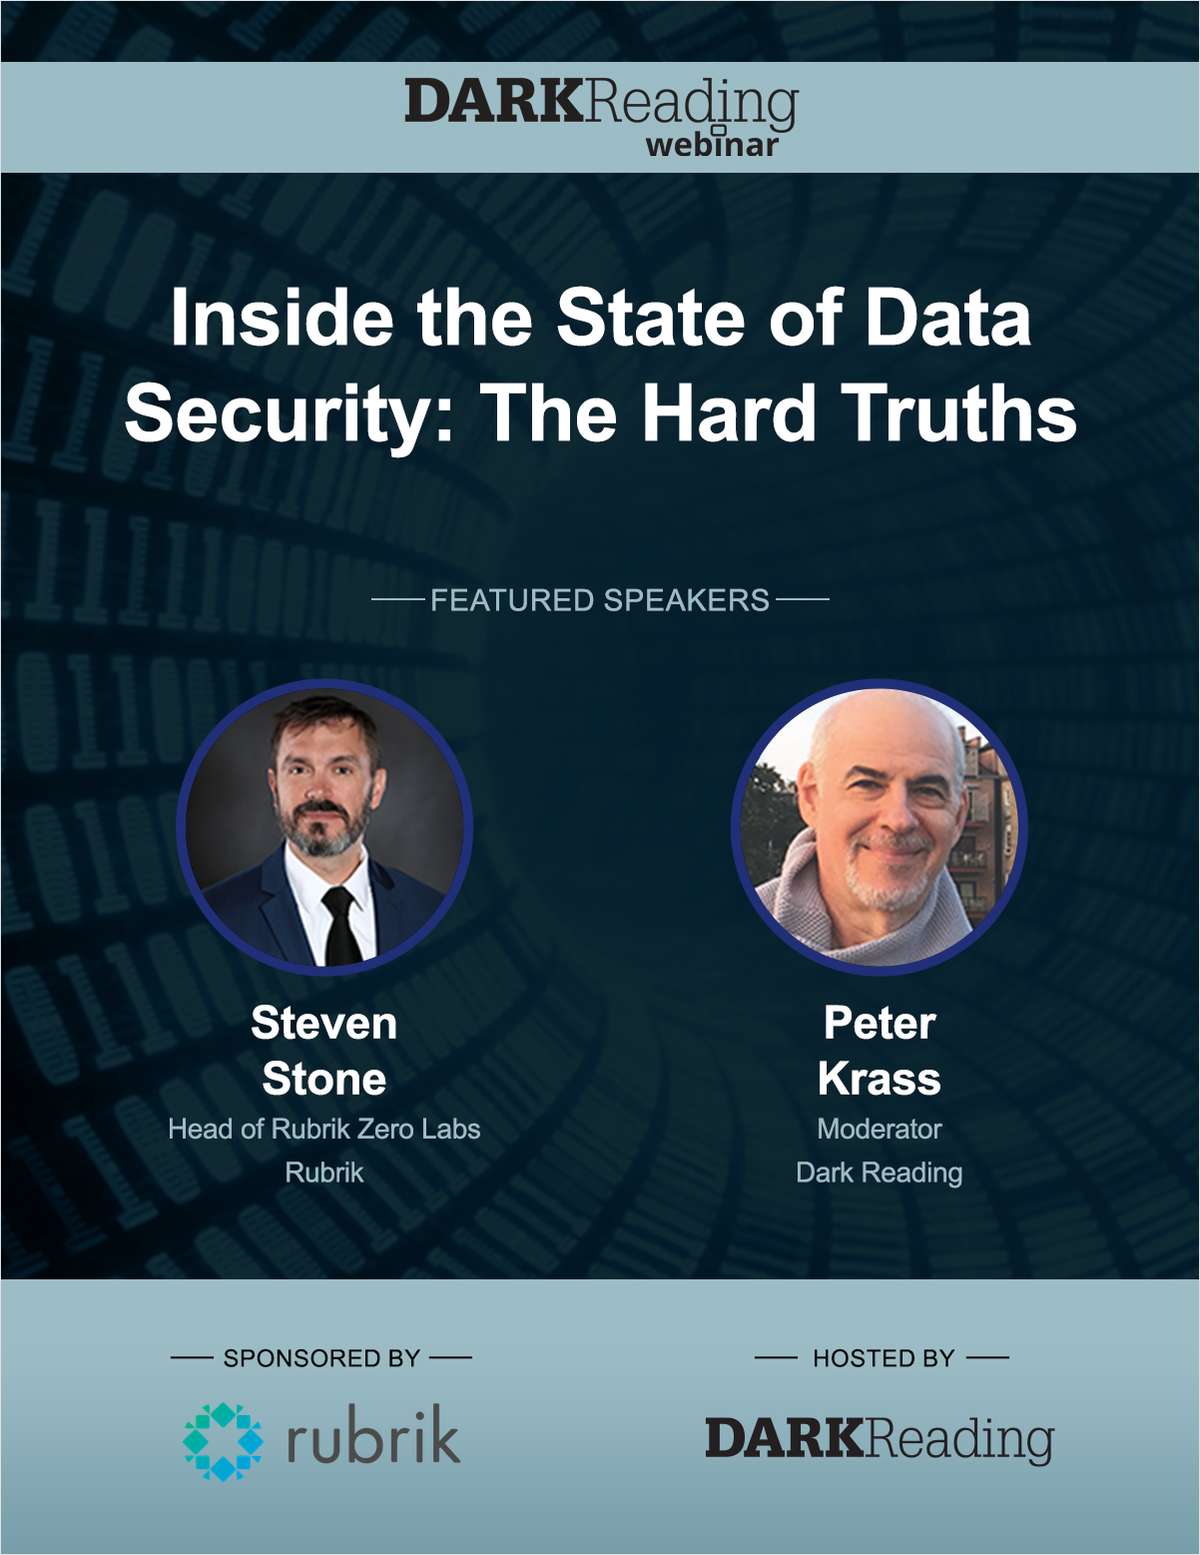 Inside the State of Data Security: The Hard Truths